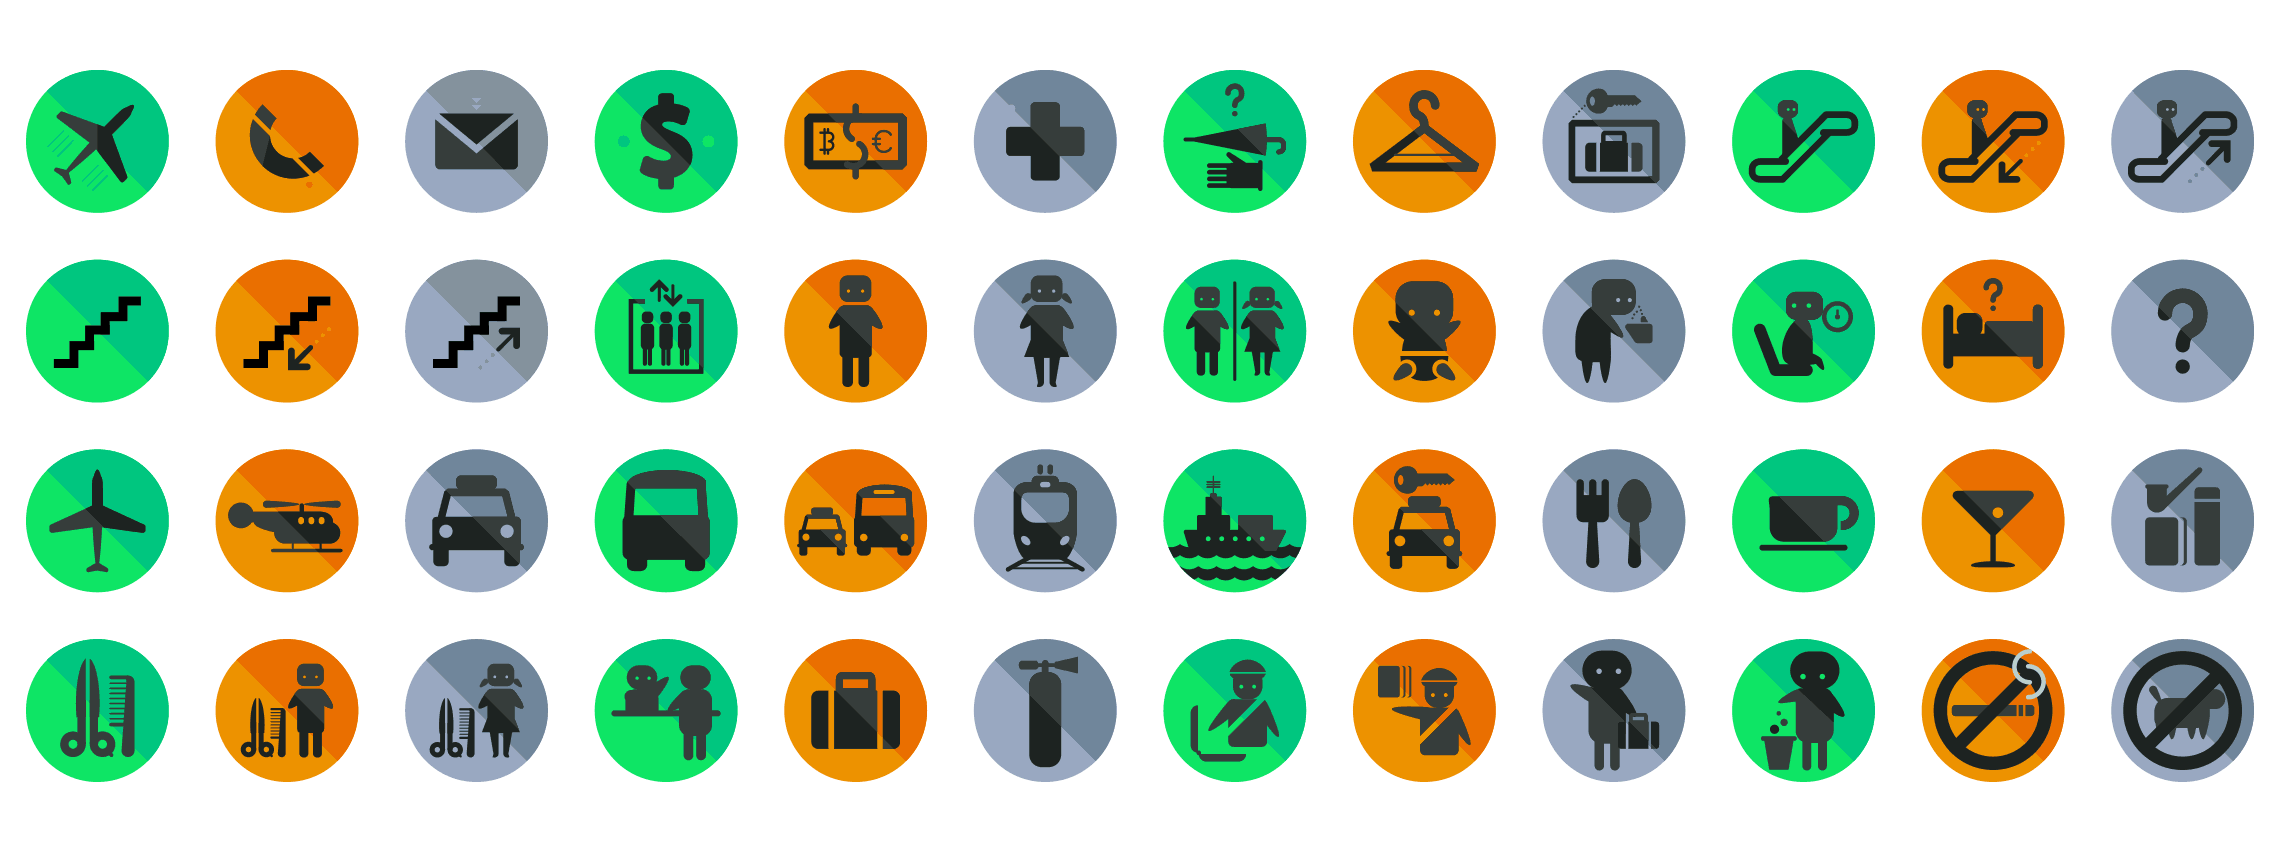 Airport-flat-icons